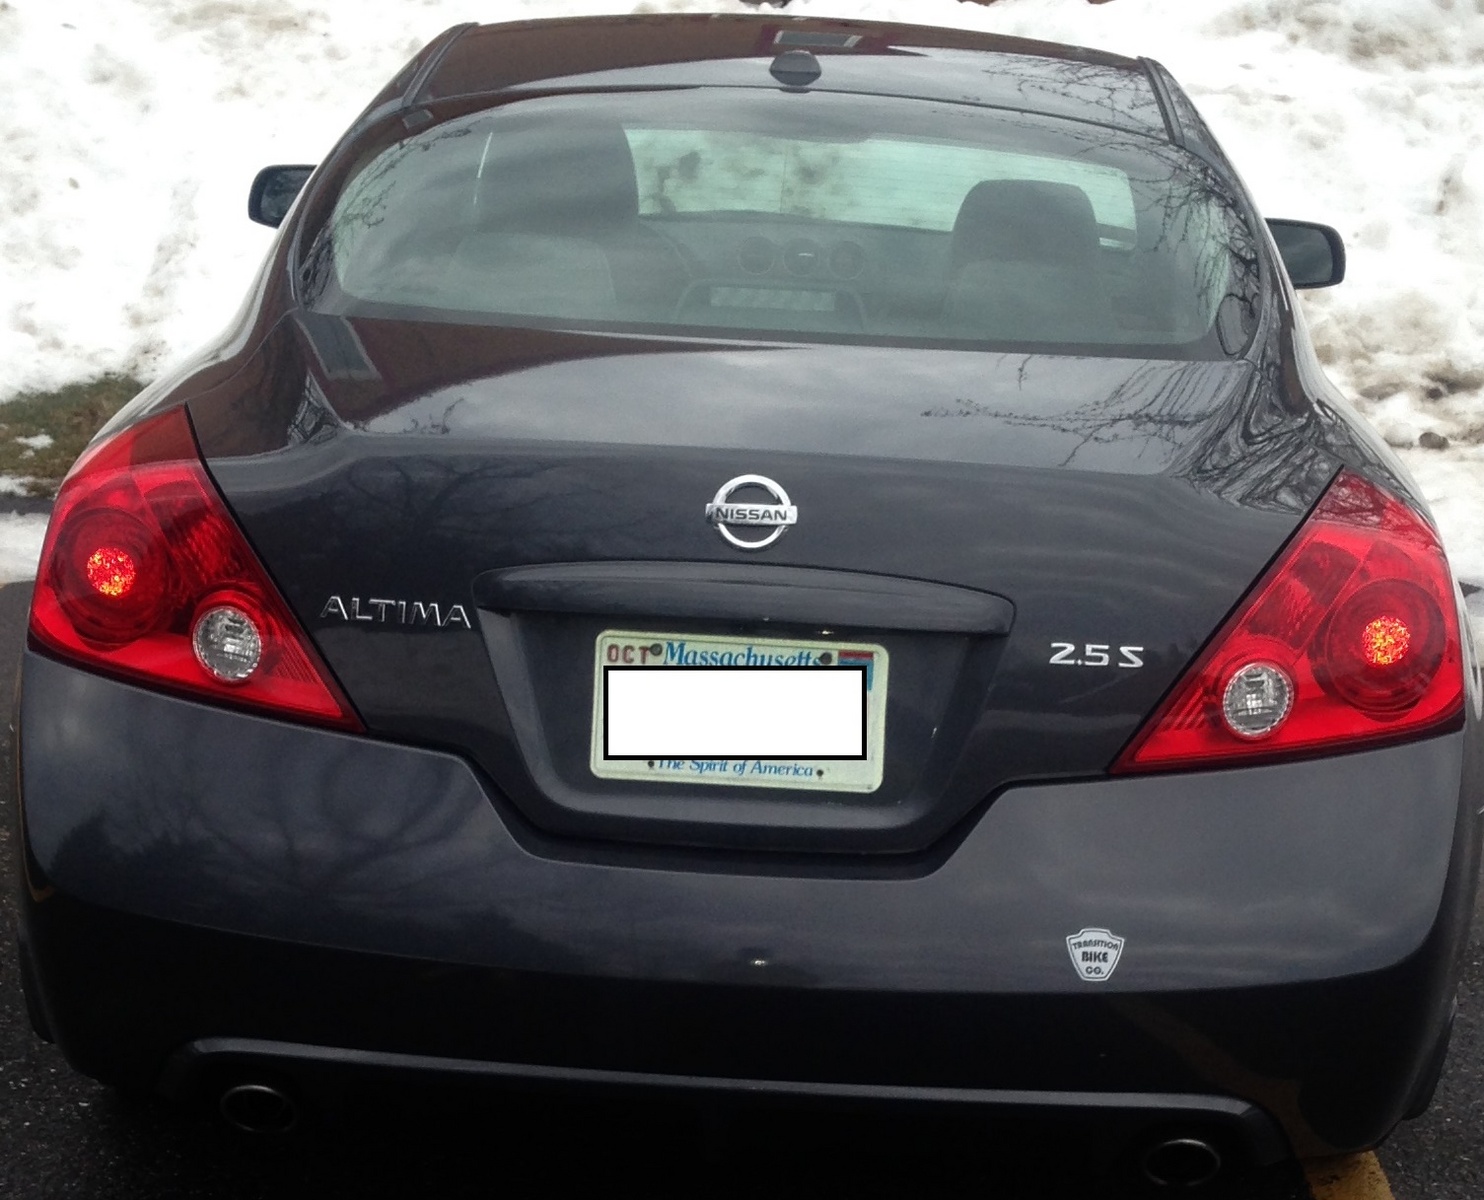 2011 Nissan altima 2.5 s coupe reviews #4